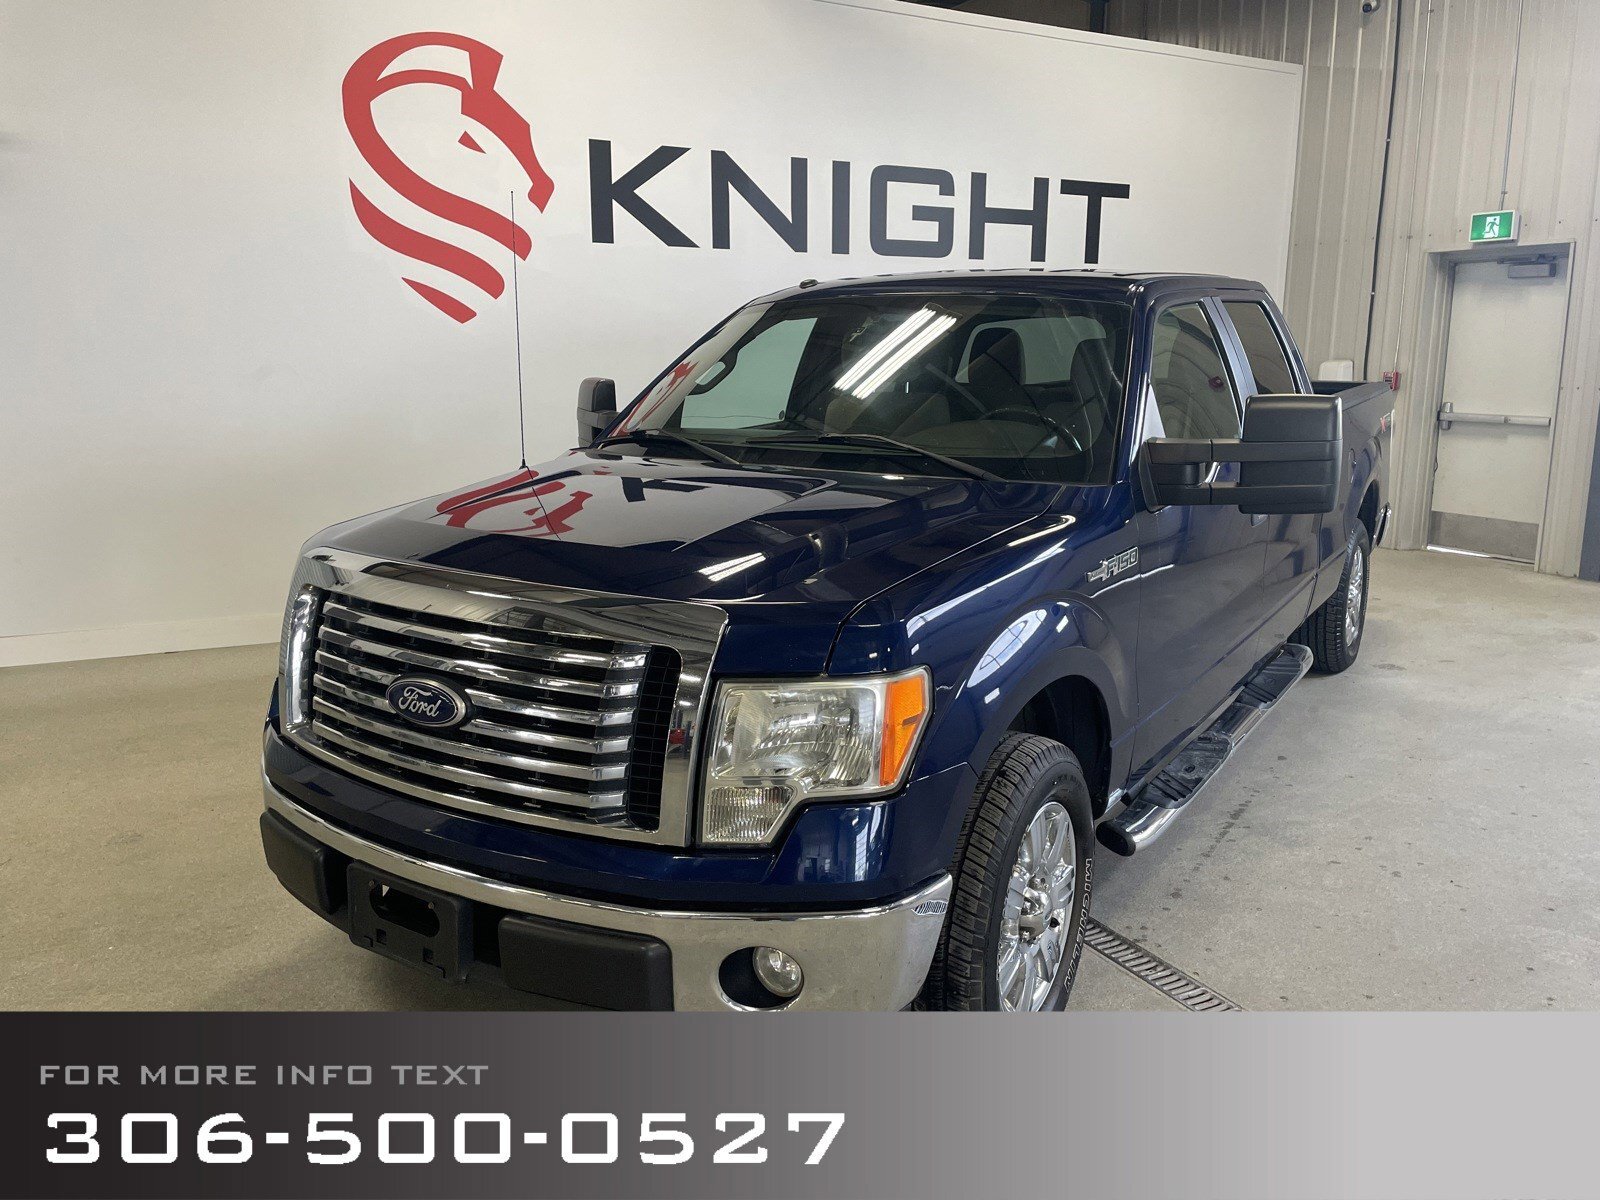 2010 Ford F-150 XLT XTR Package - CALL for Details